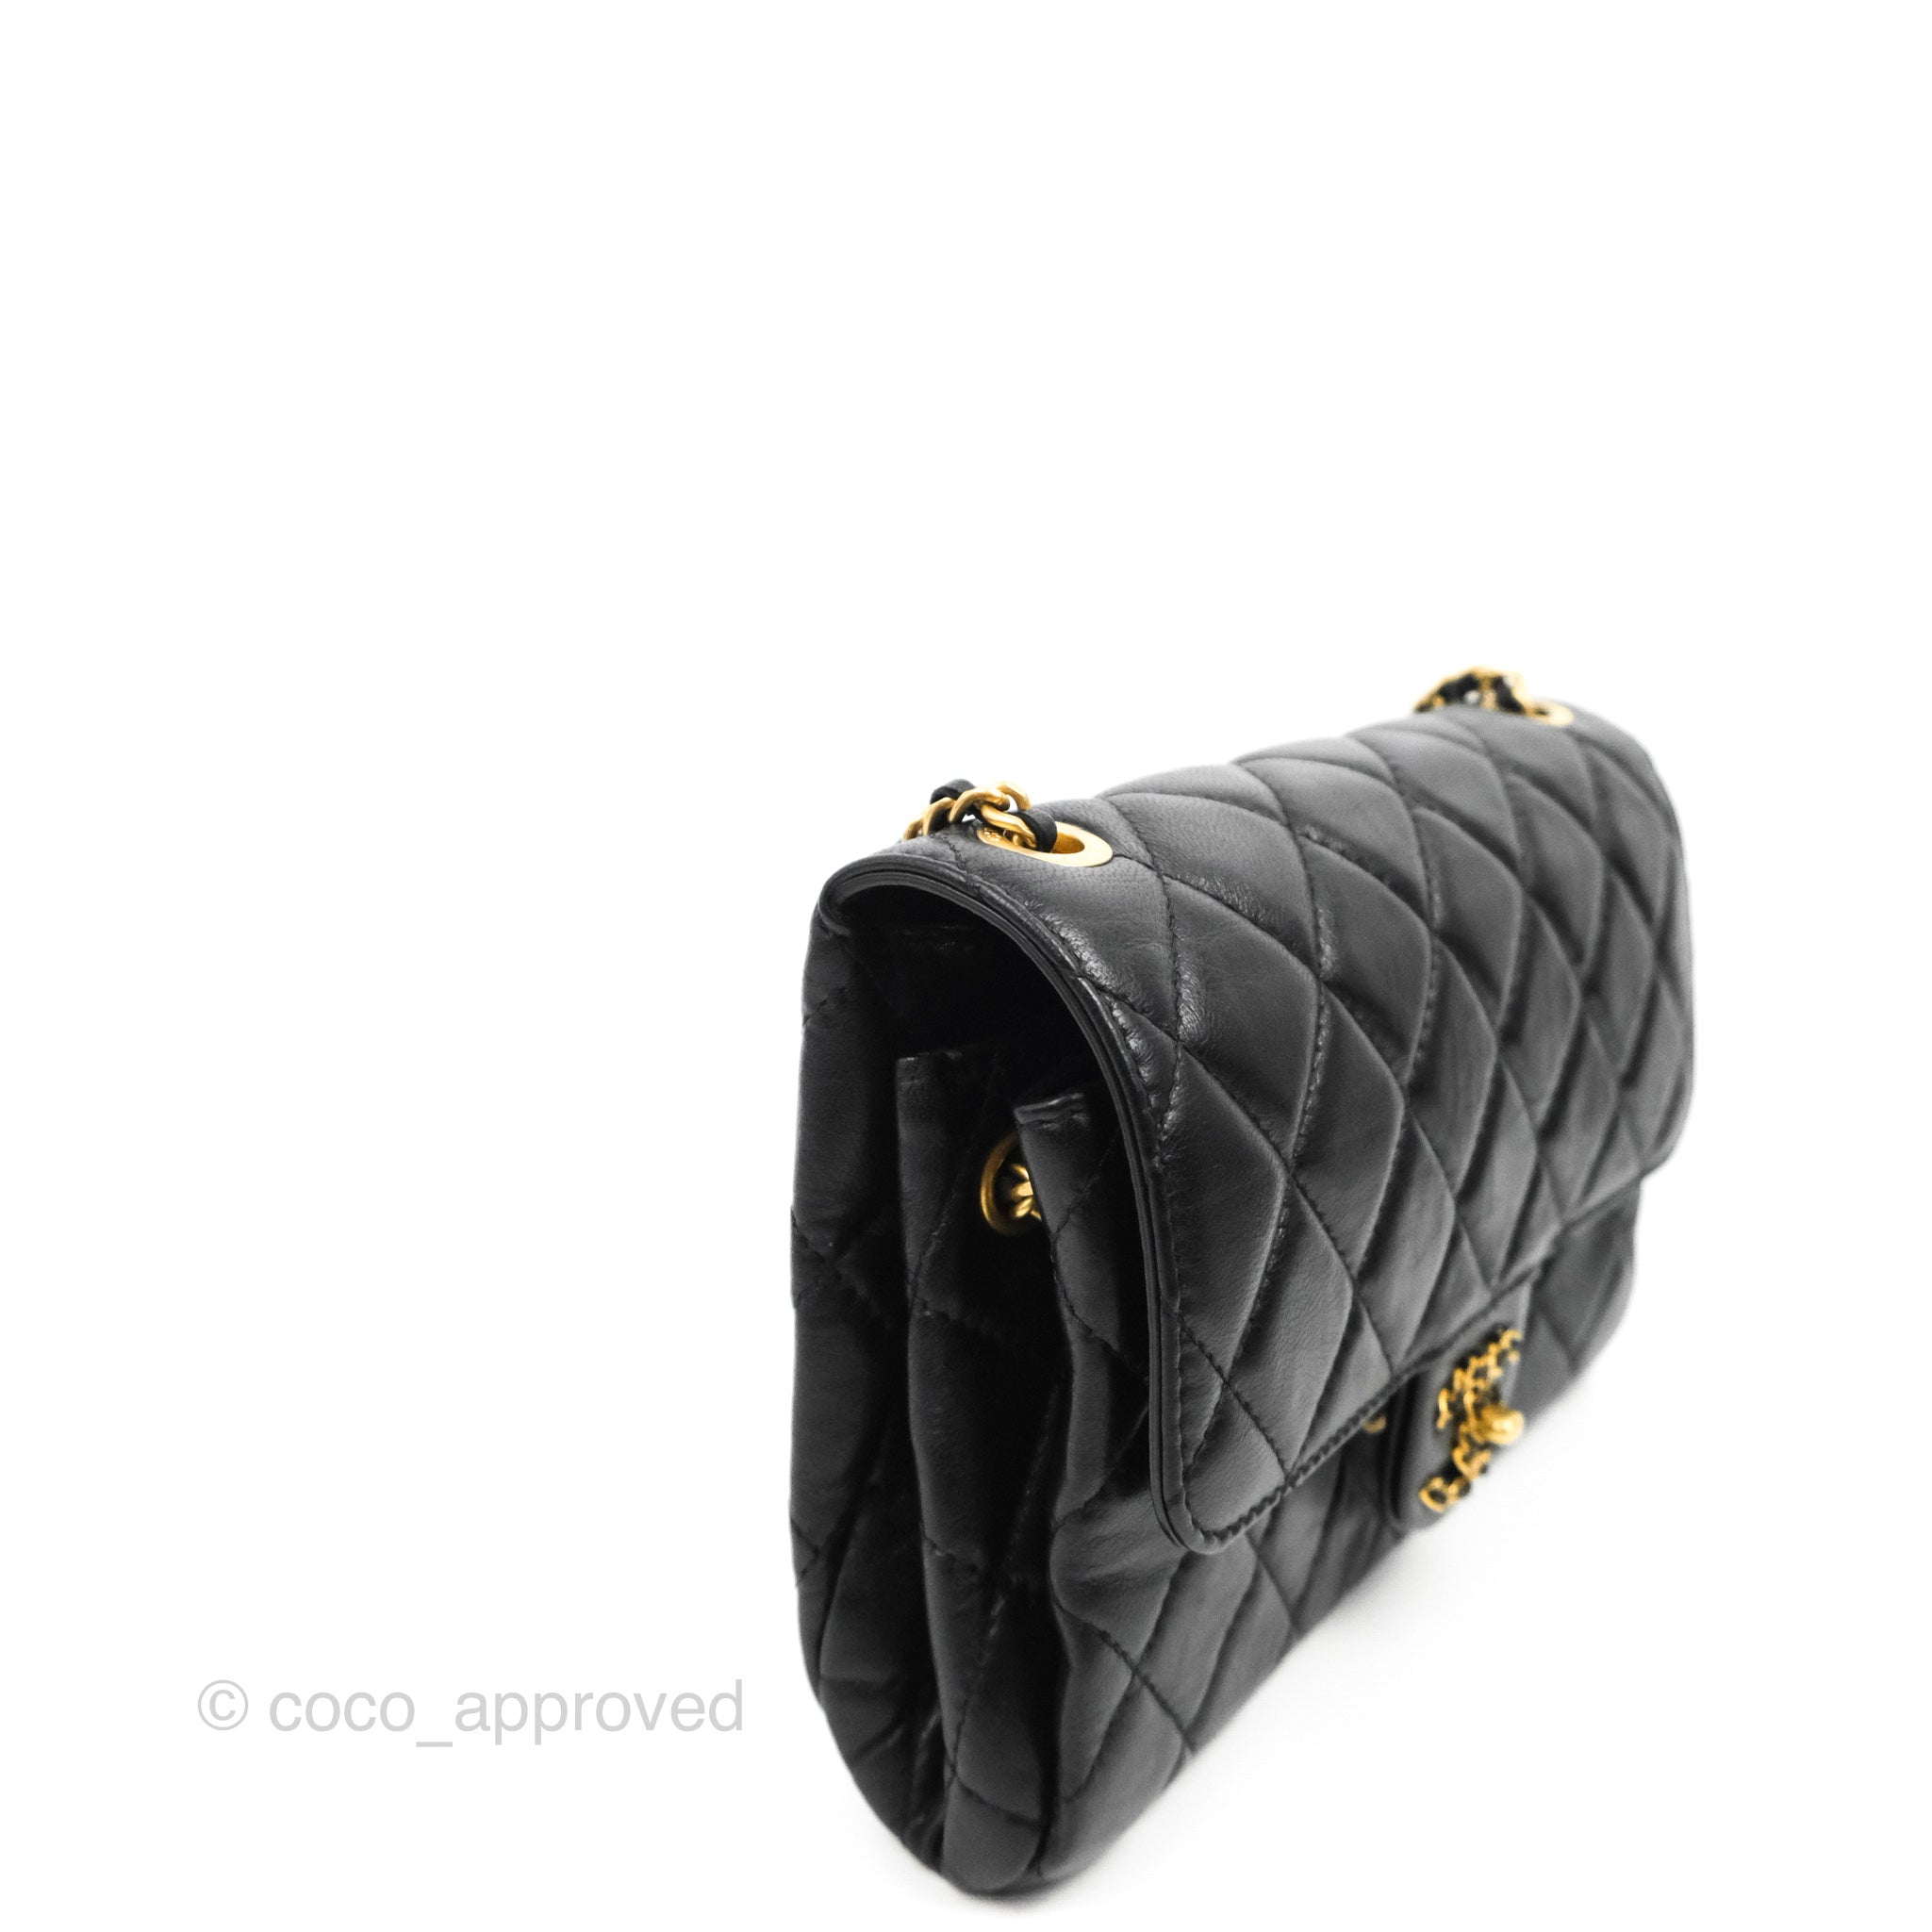 Chanel Flap Bag Black Lambskin Aged Gold Hardware – Coco Approved Studio